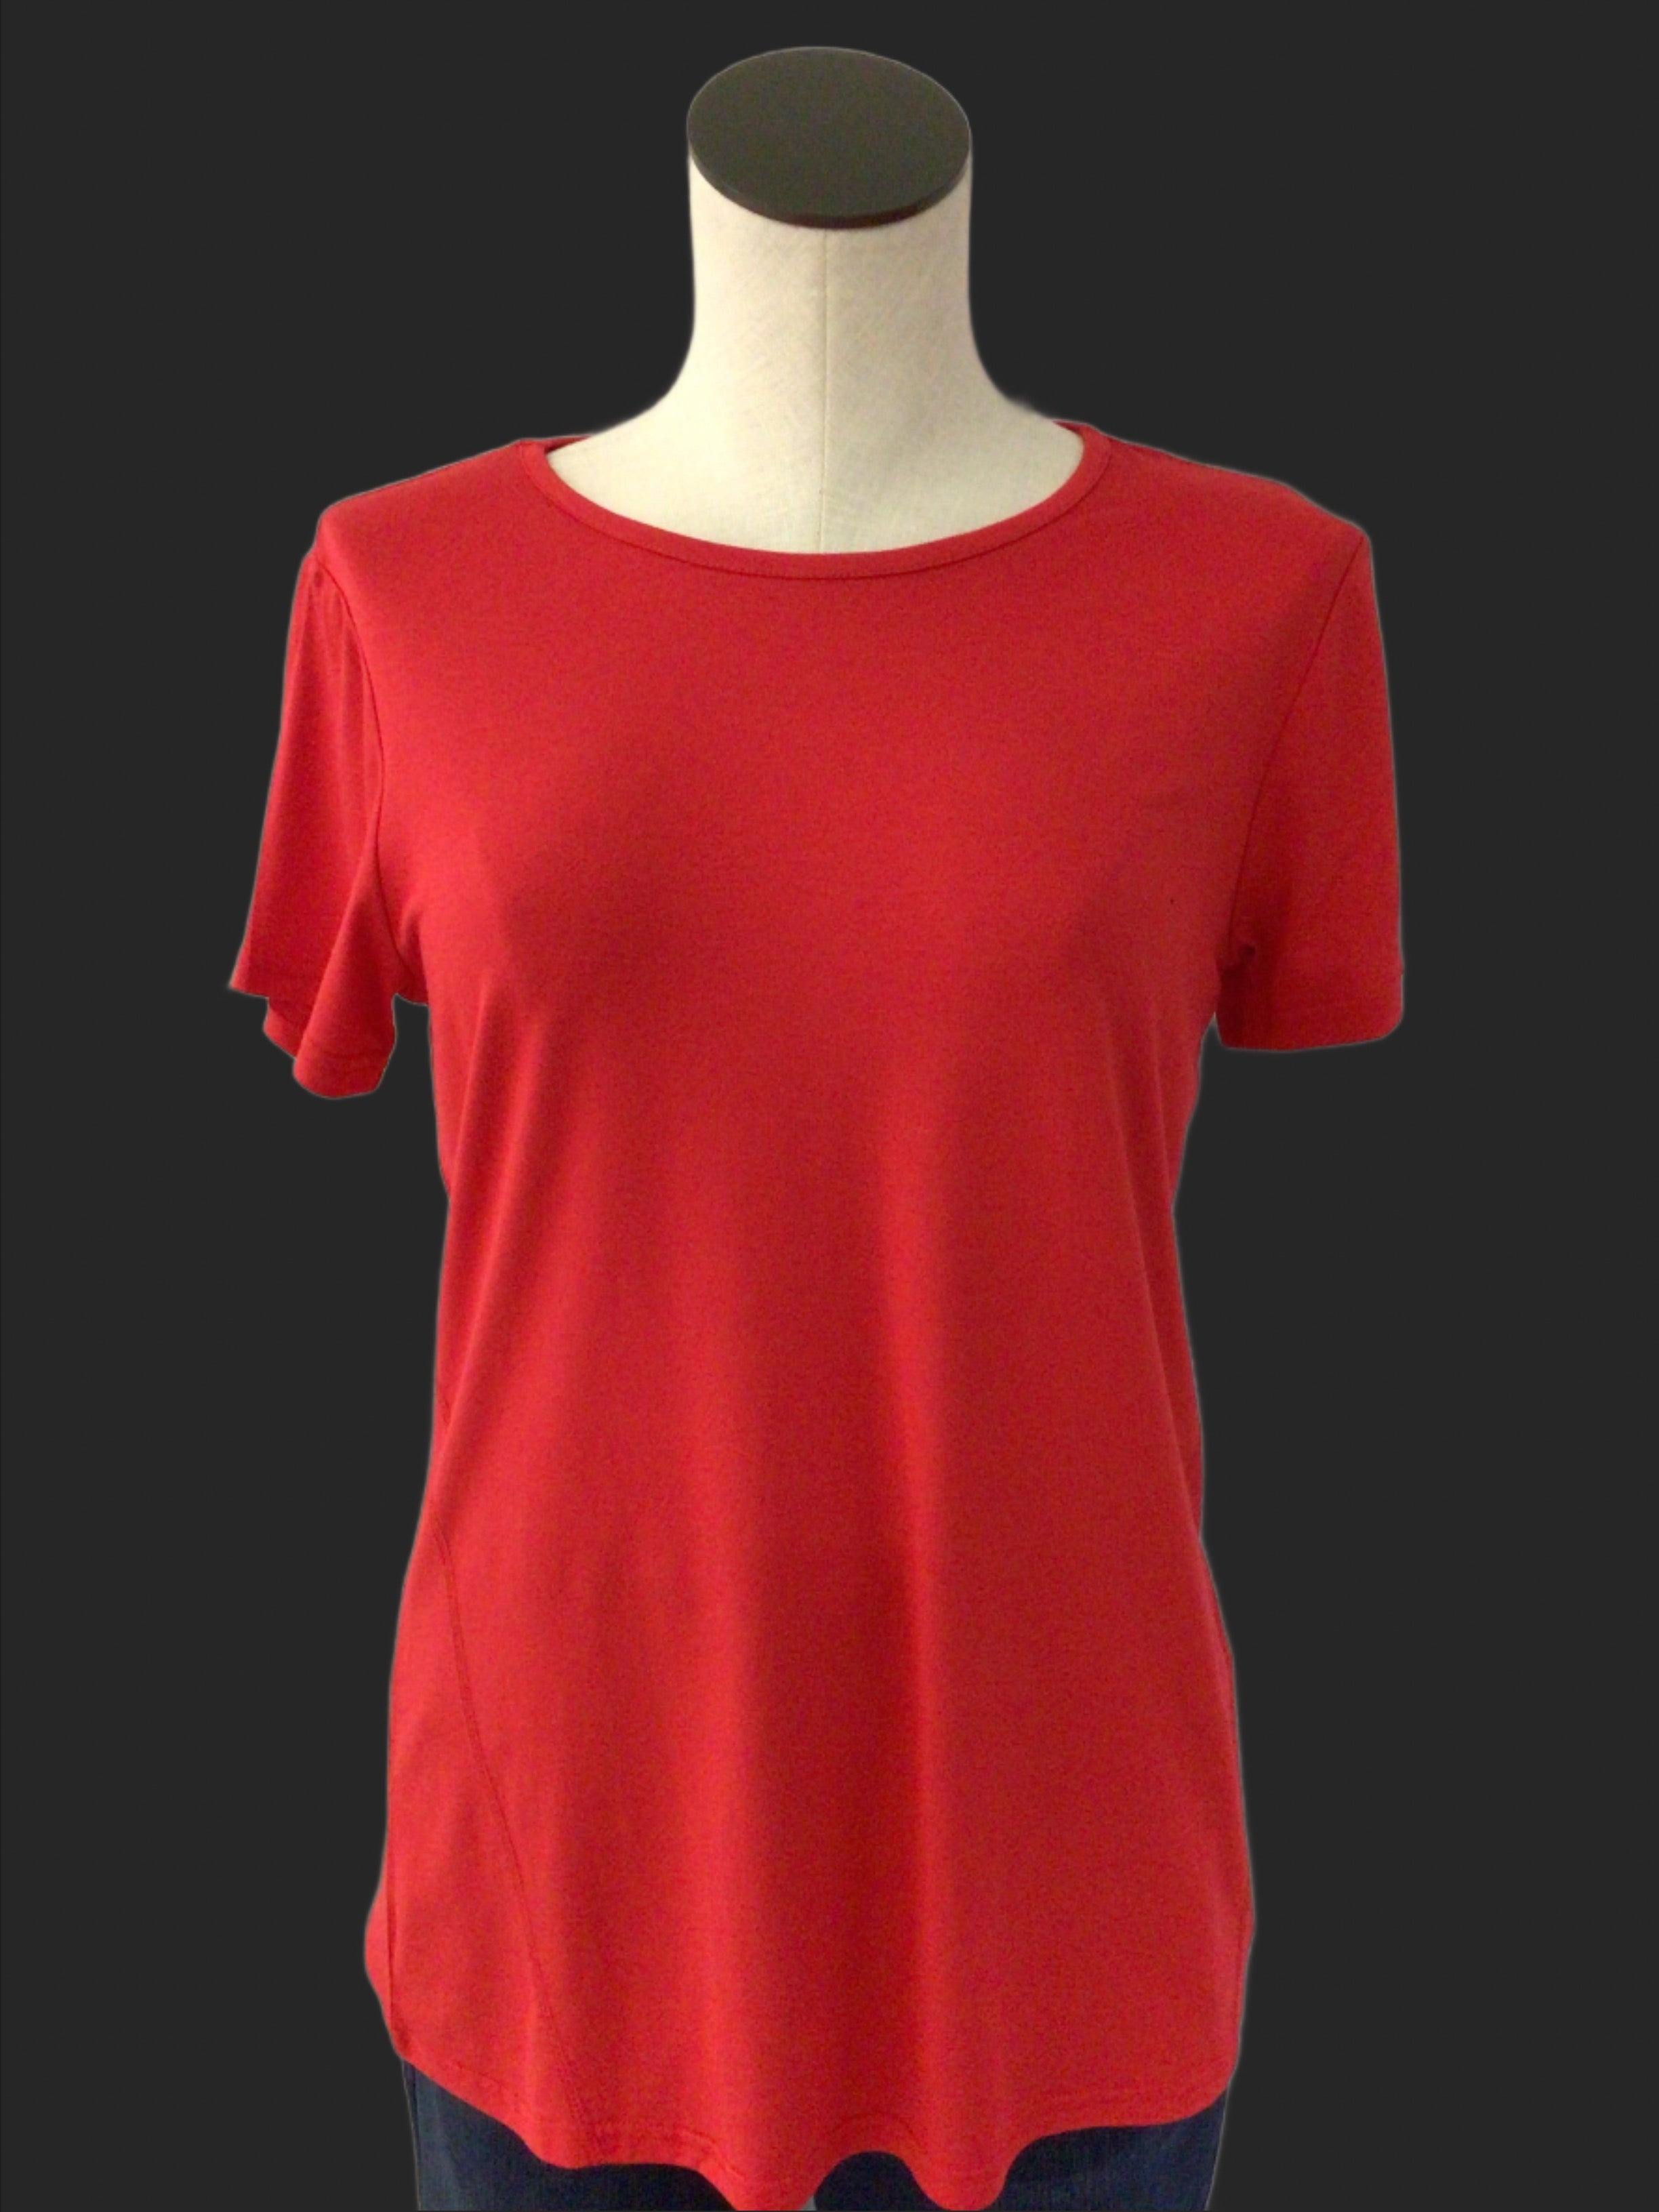 Orly Red Tee Shirt 81202